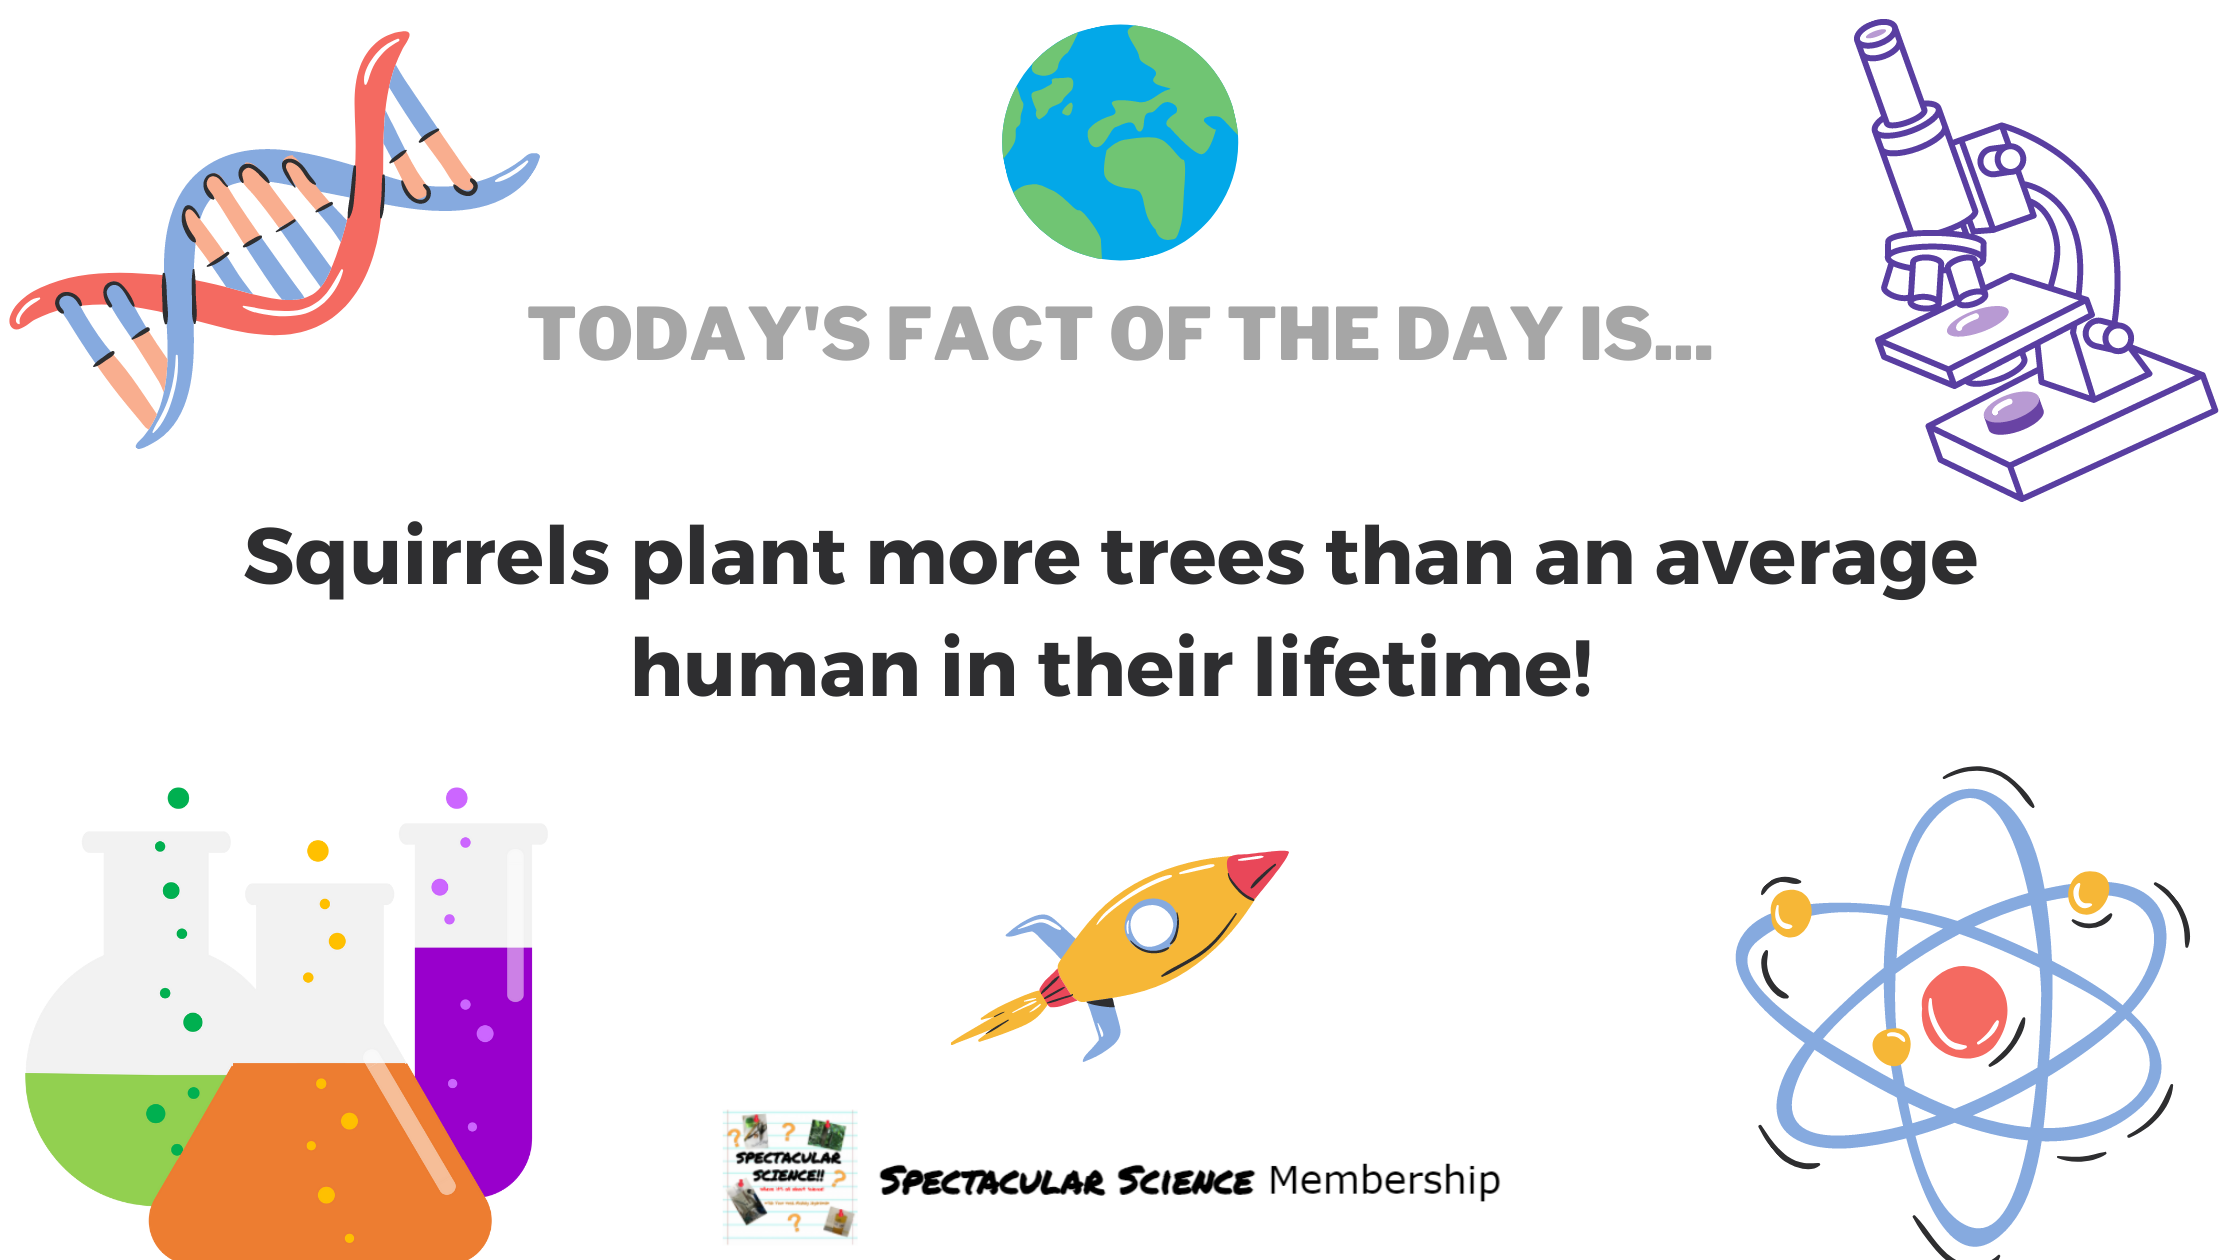 Fact of the Day Image Feb. 24th